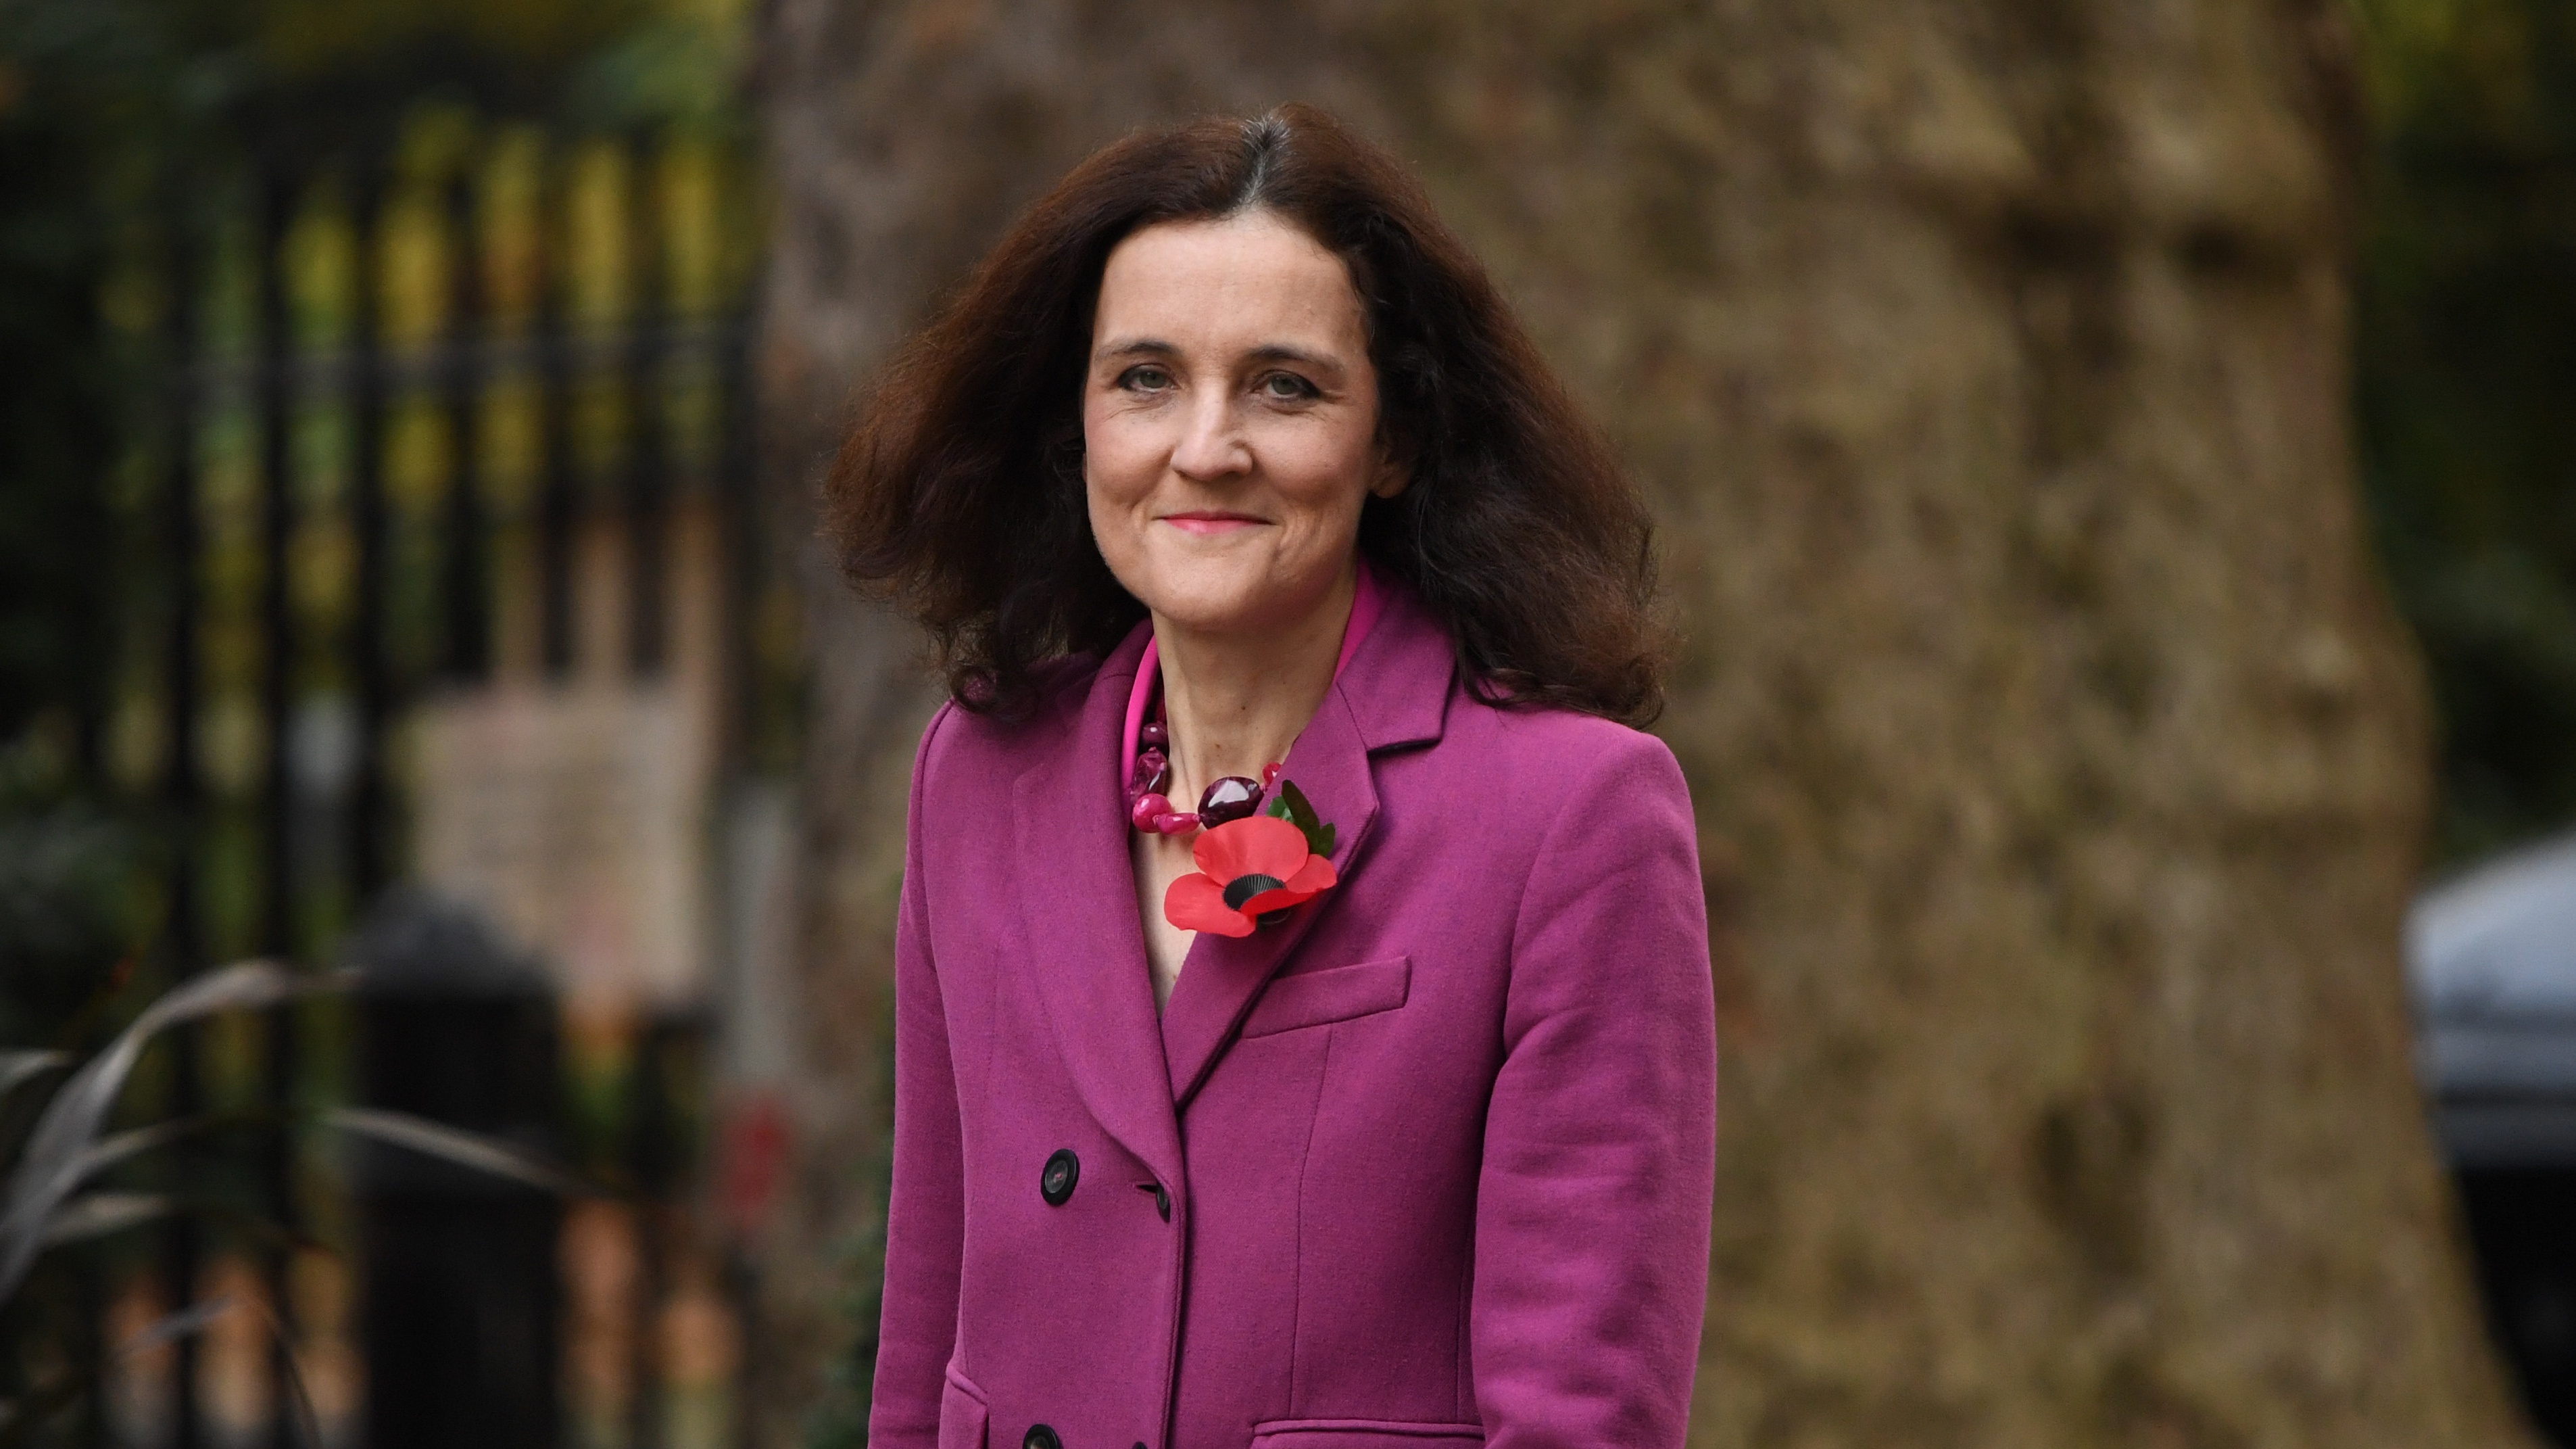 Theresa Villiers arrives at 10 Downing Street for a cabinet meeting in November 2019.